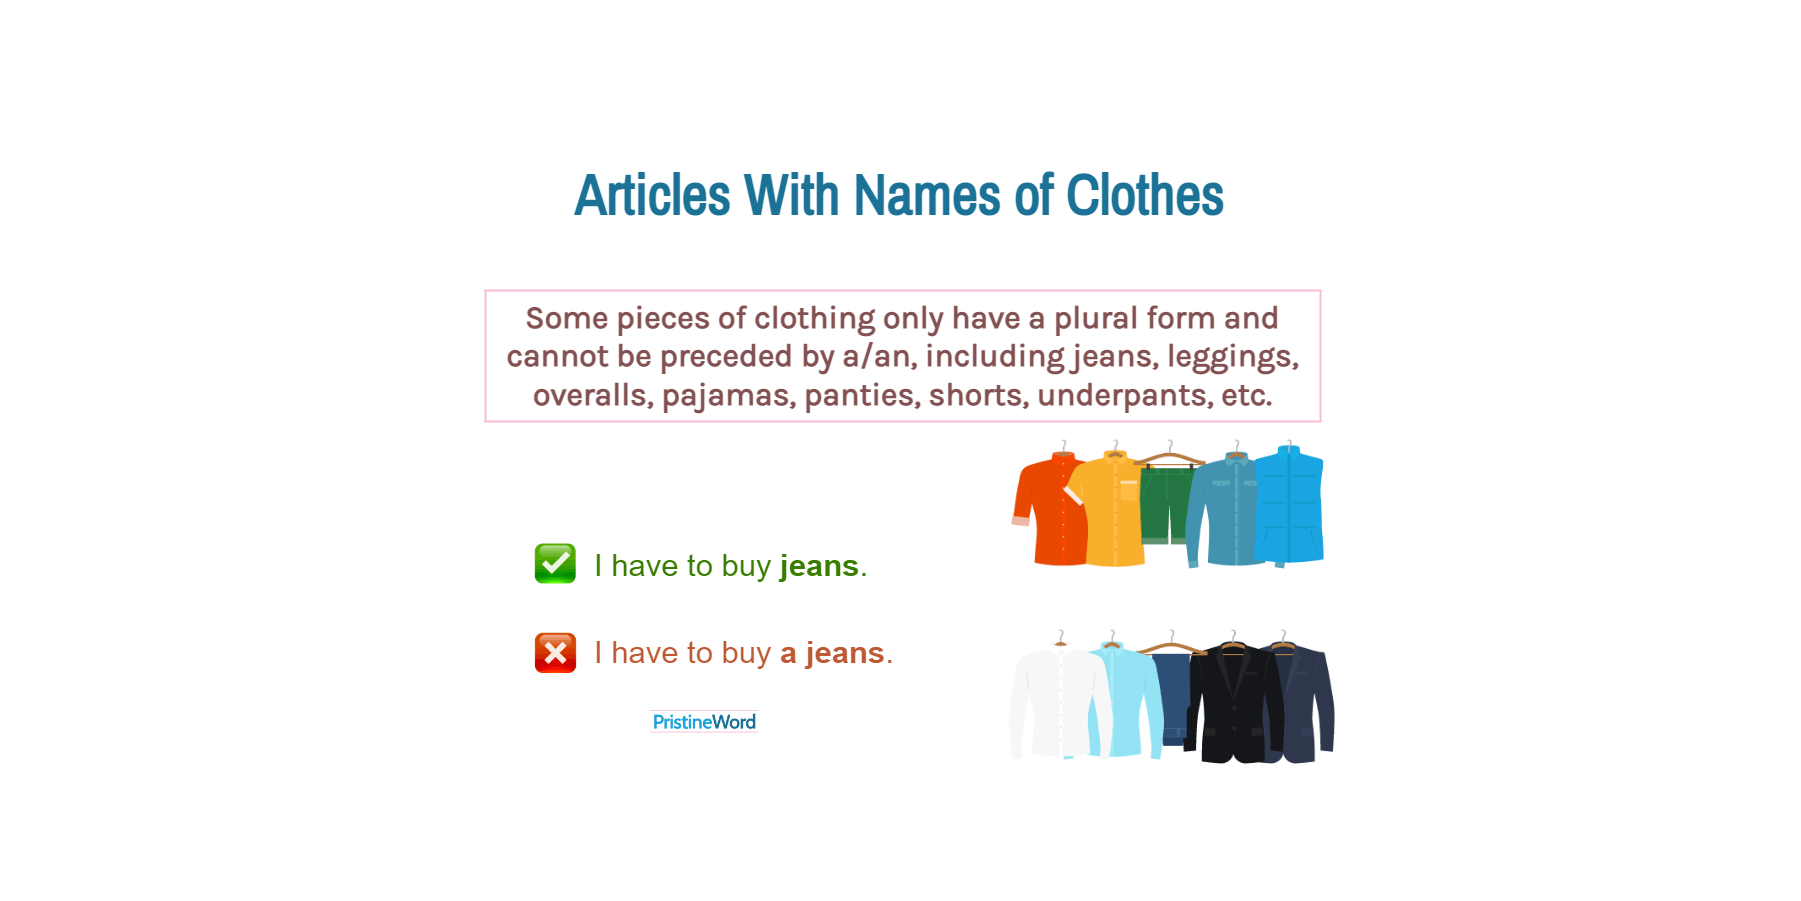 Articles (a/the) with Pieces of Clothing